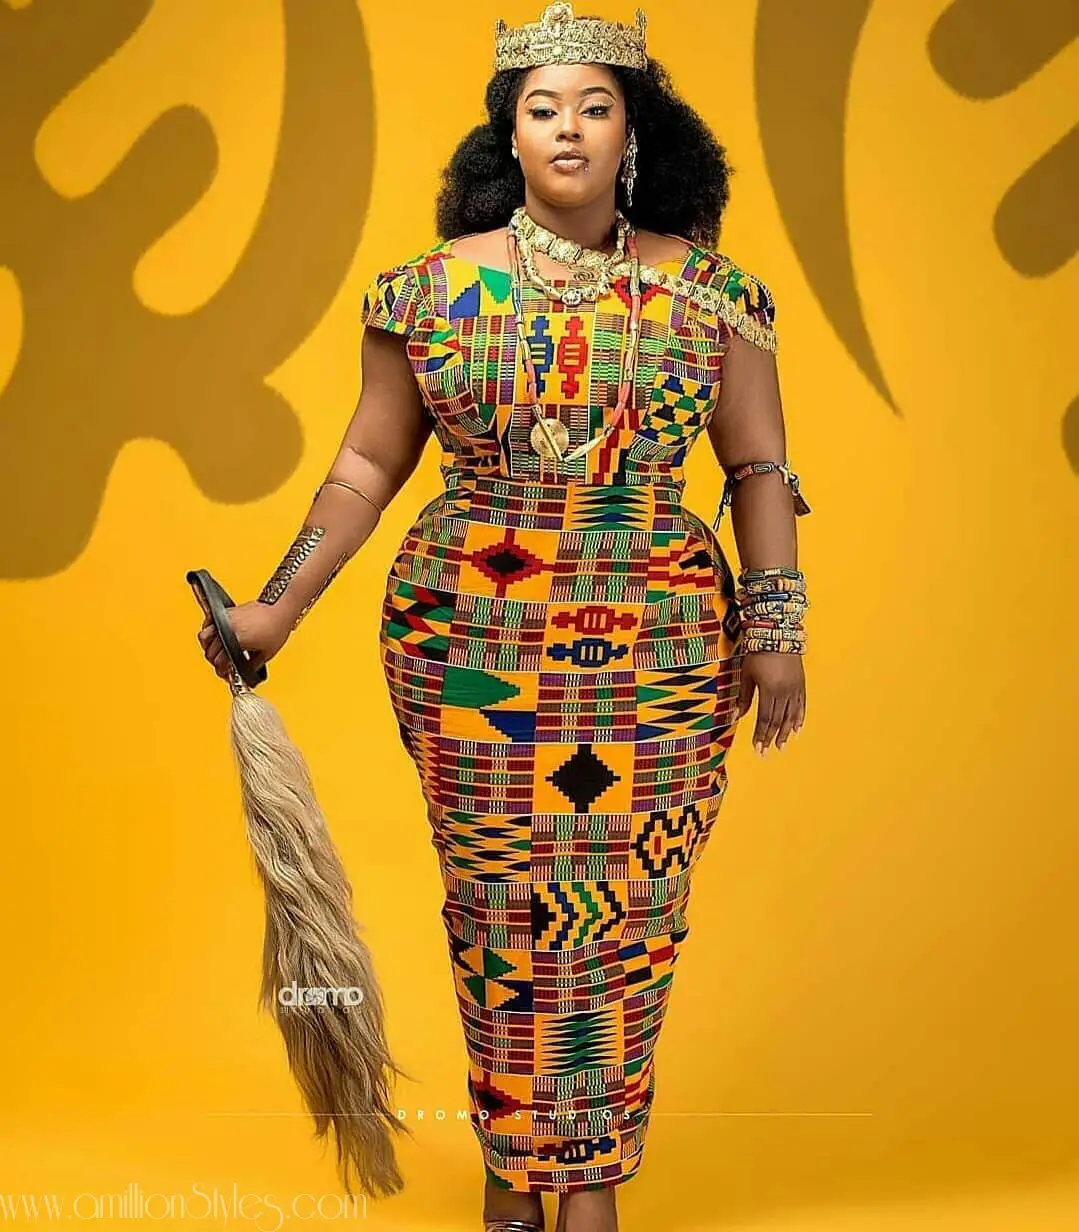 Don't You Just Love Ghanaian Kente Styles?